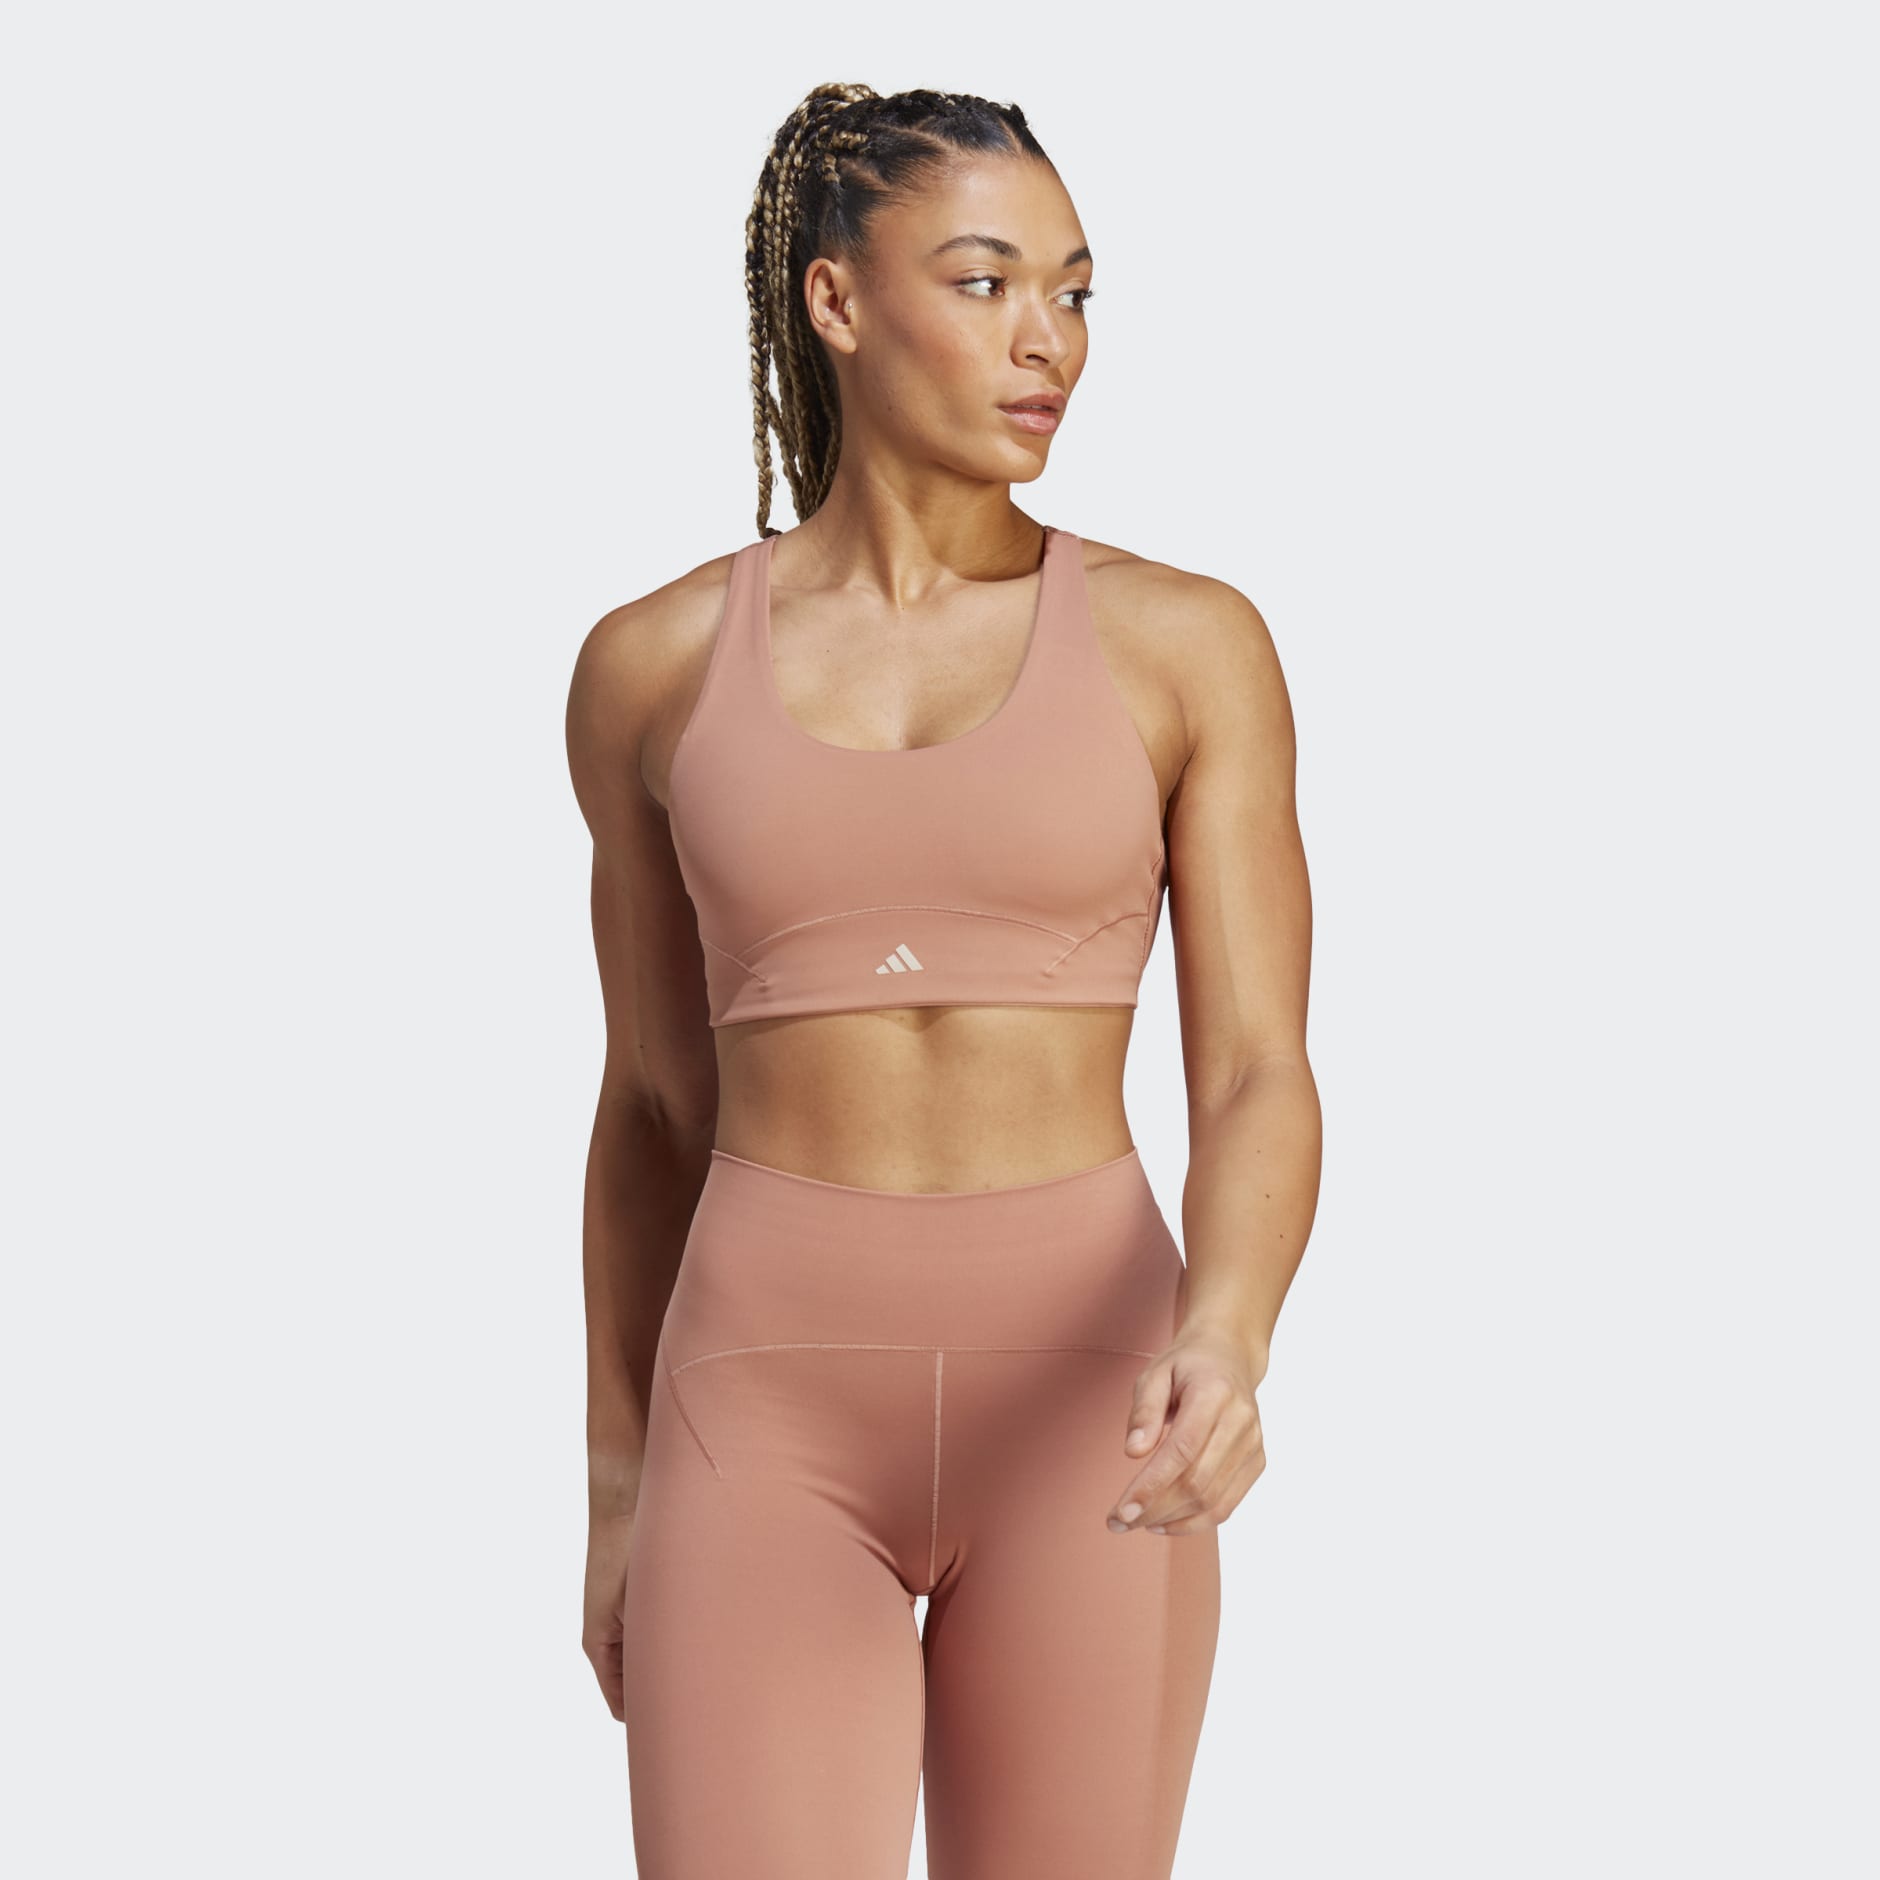 Women's Studio Collection, Gym & Fitness Clothing